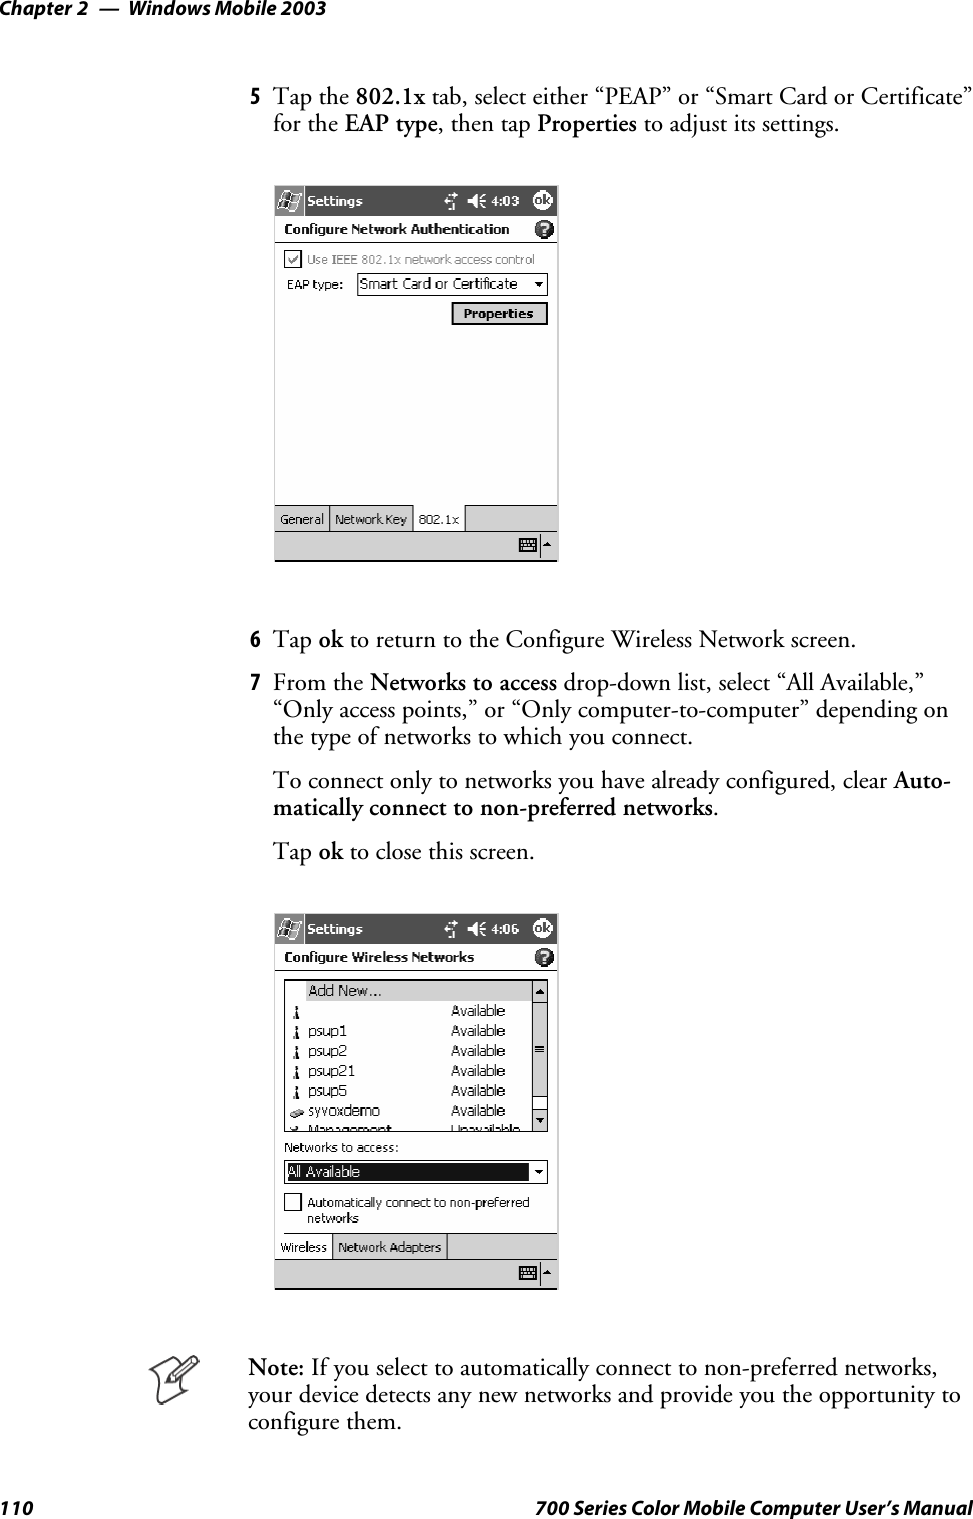 Windows Mobile 2003Chapter —2110 700 Series Color Mobile Computer User’s Manual5Tap the 802.1x tab, select either “PEAP” or “Smart Card or Certificate”for the EAP type,thentapProperties to adjust its settings.6Tap ok to return to the Configure Wireless Network screen.7From the Networks to access drop-down list, select “All Available,”“Only access points,” or “Only computer-to-computer” depending onthetypeofnetworkstowhichyouconnect.To connect only to networks you have already configured, clear Auto-matically connect to non-preferred networks.Tap ok to close this screen.Note: If you select to automatically connect to non-preferred networks,your device detects any new networks and provide you the opportunity toconfigure them.